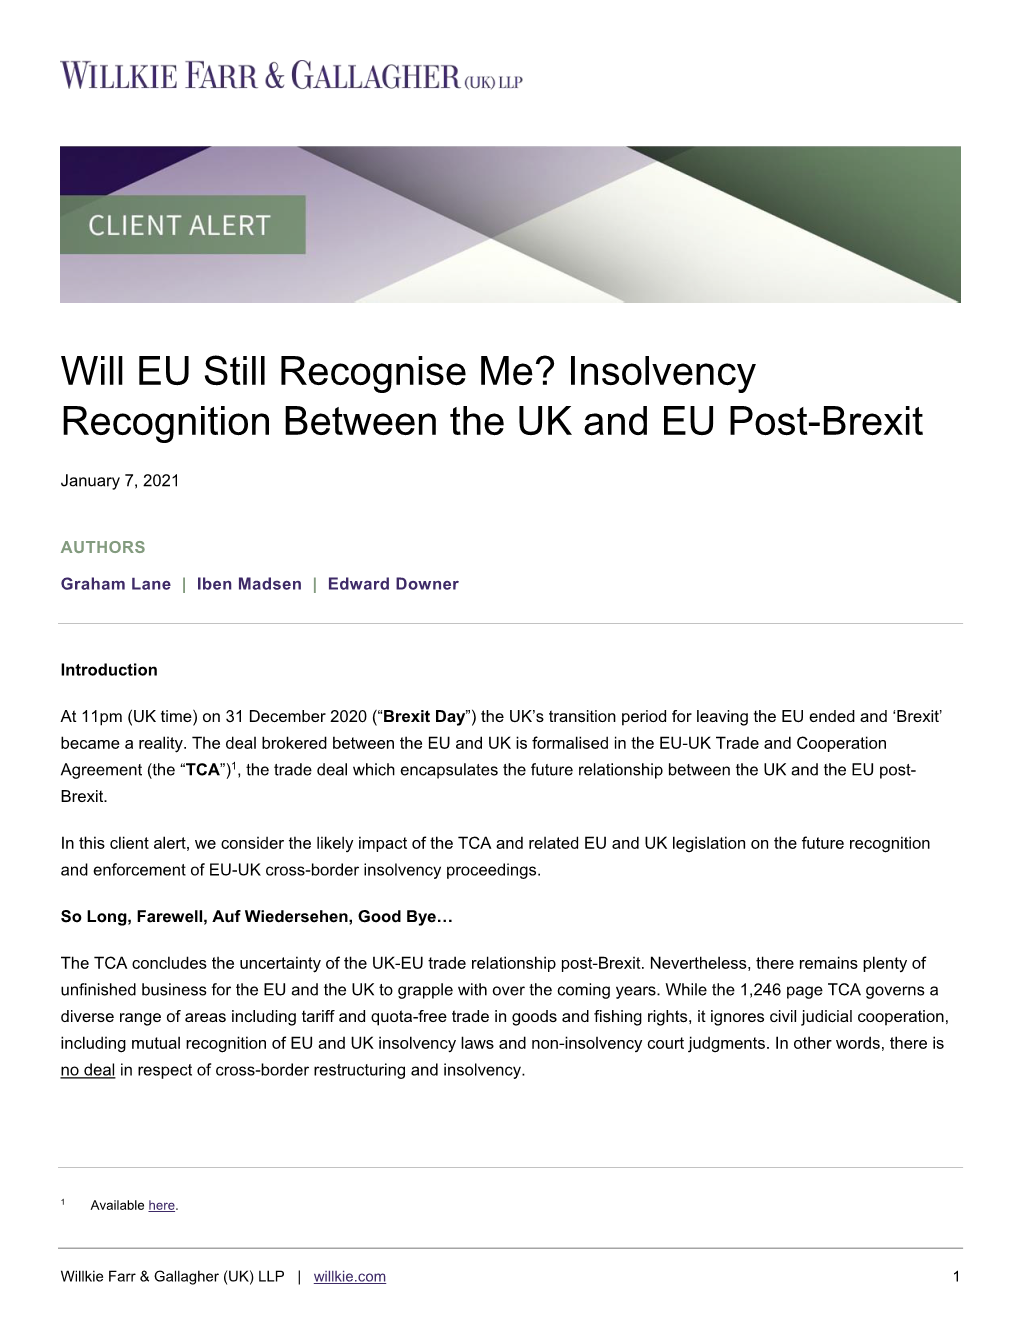 Insolvency Recognition Between the UK and EU Post-Brexit